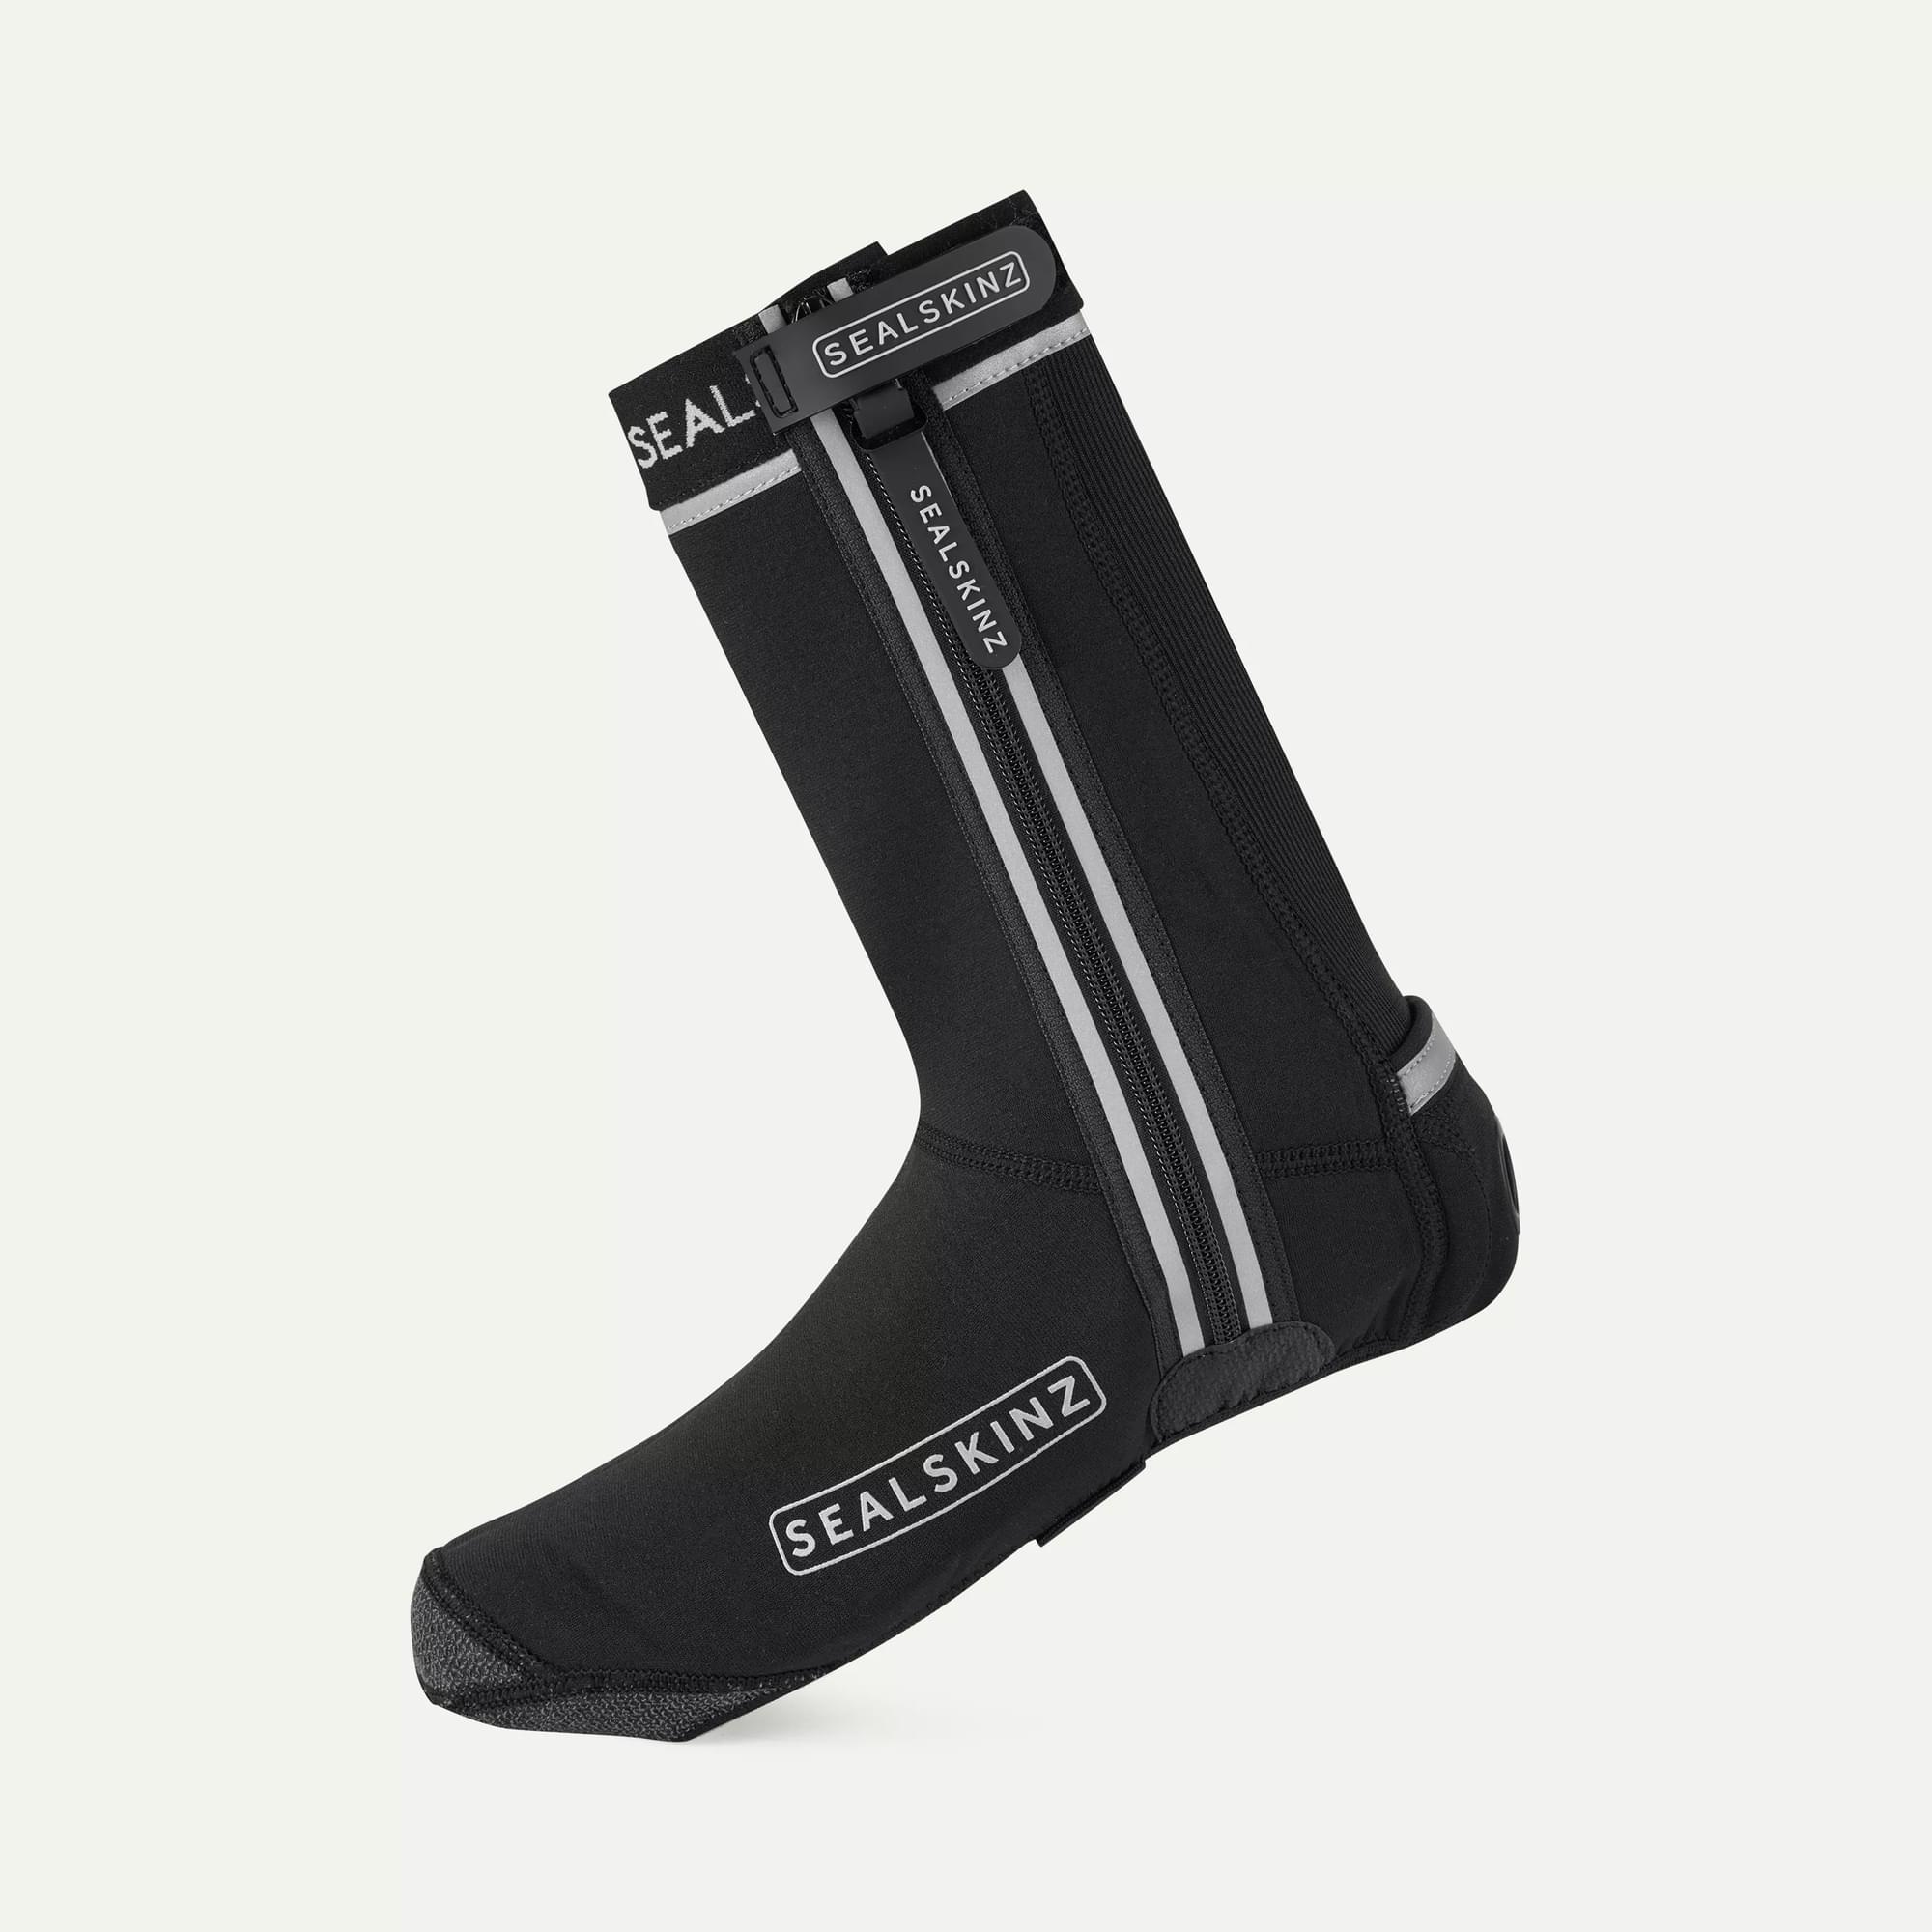 White cycling overshoes with sock fabric